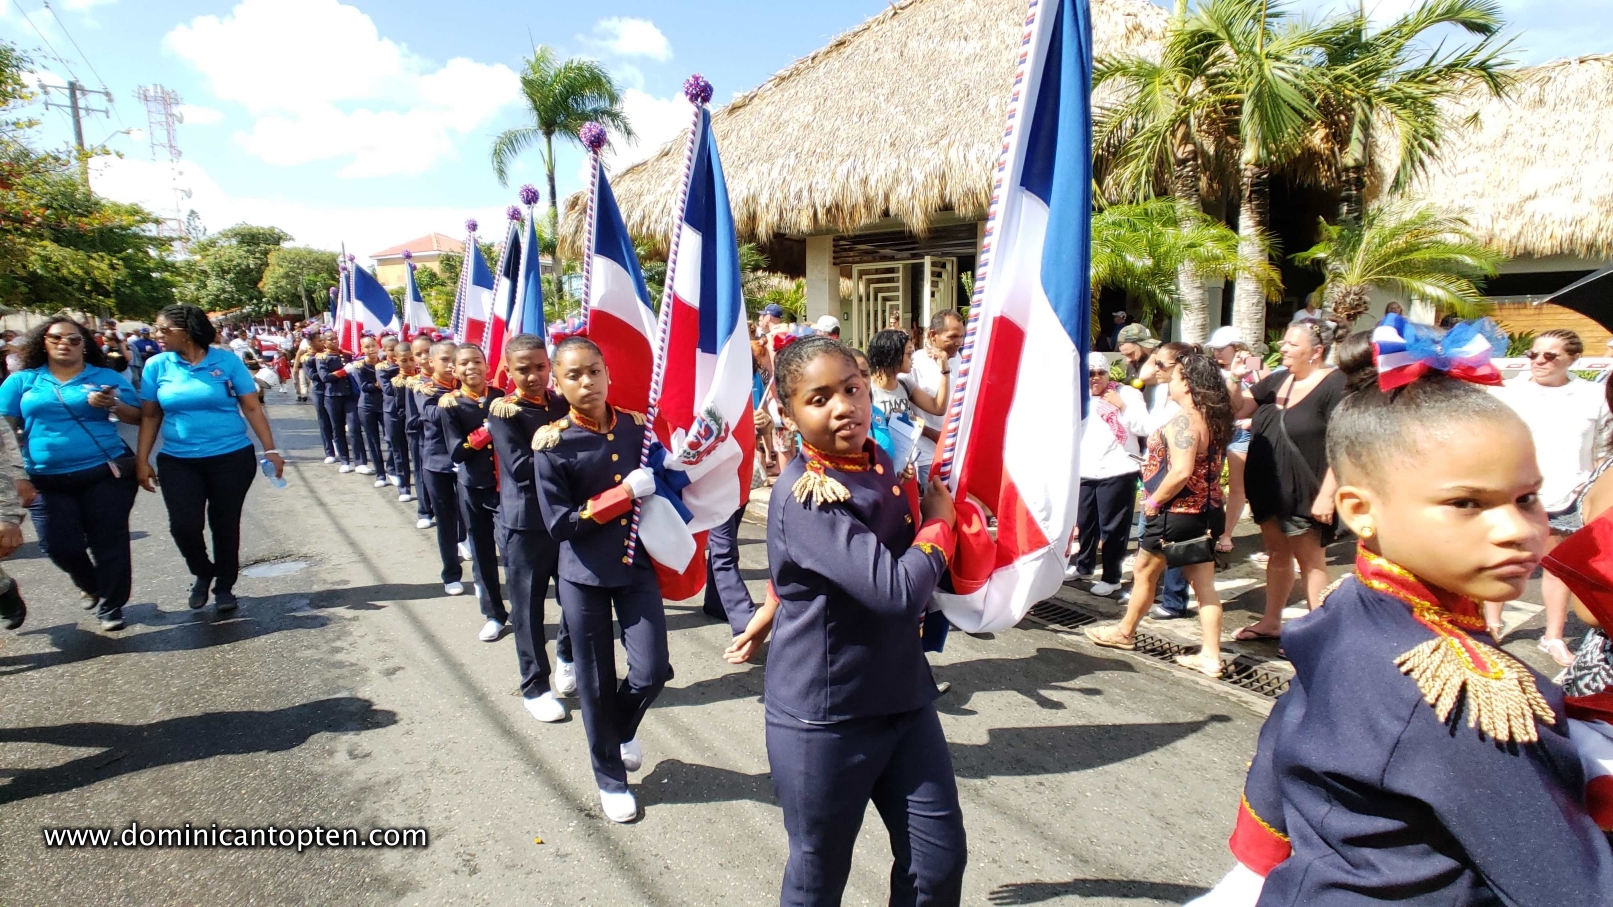 the independence parade attracted many locals